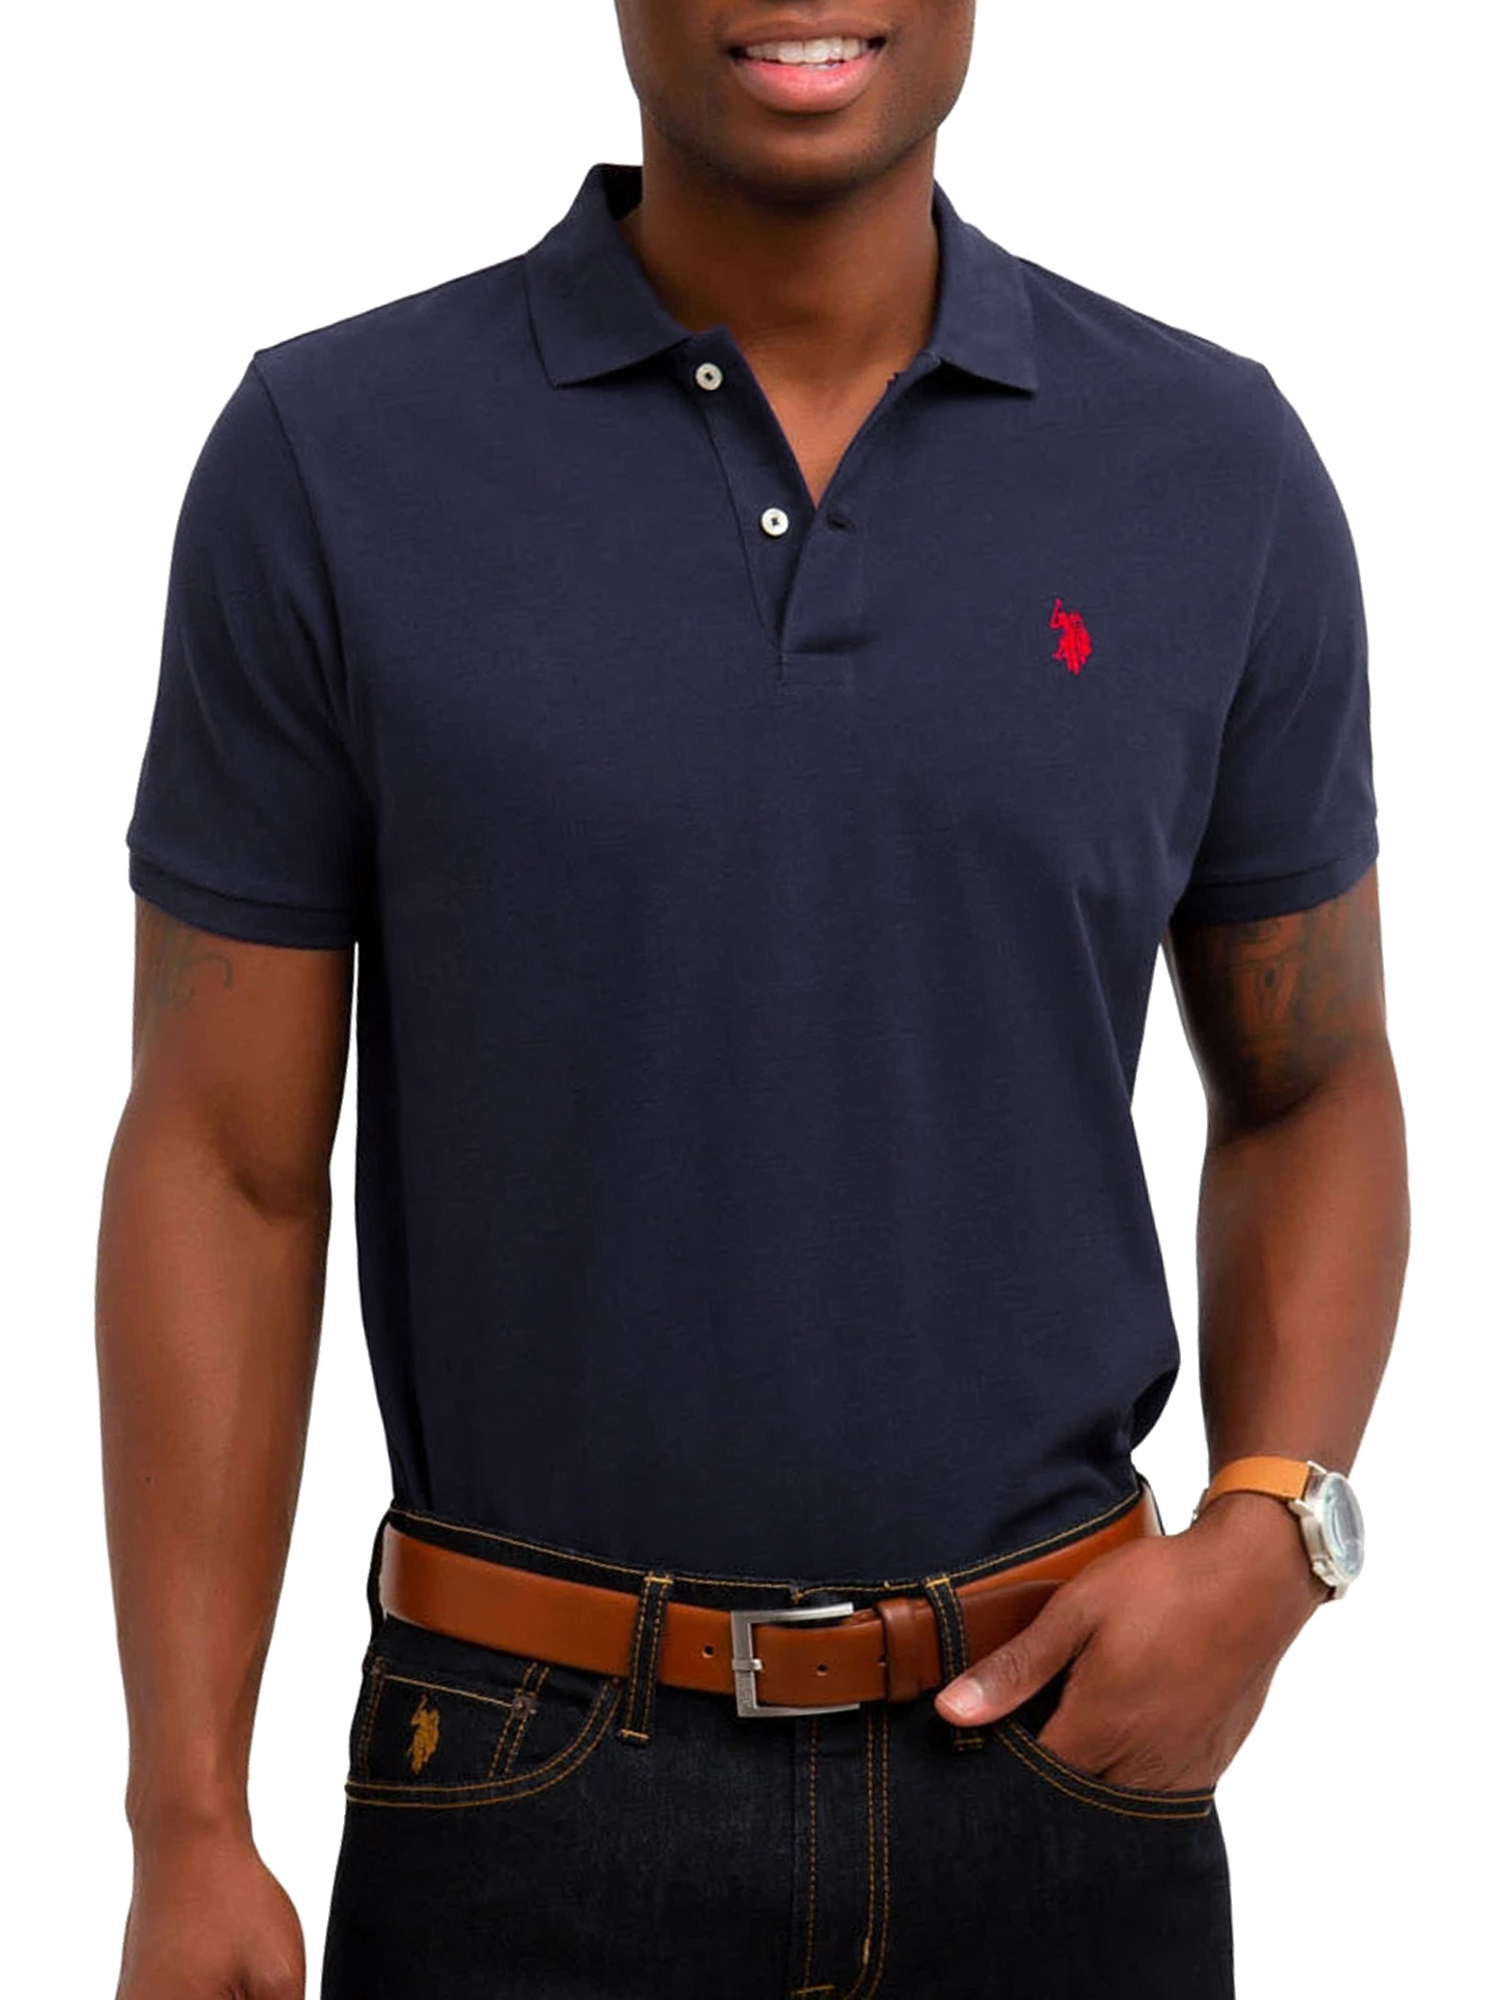 US Polo Assn. Short Sleeve Relaxed Fit Cotton Polo (Men's) 1 Pack - image 1 of 2